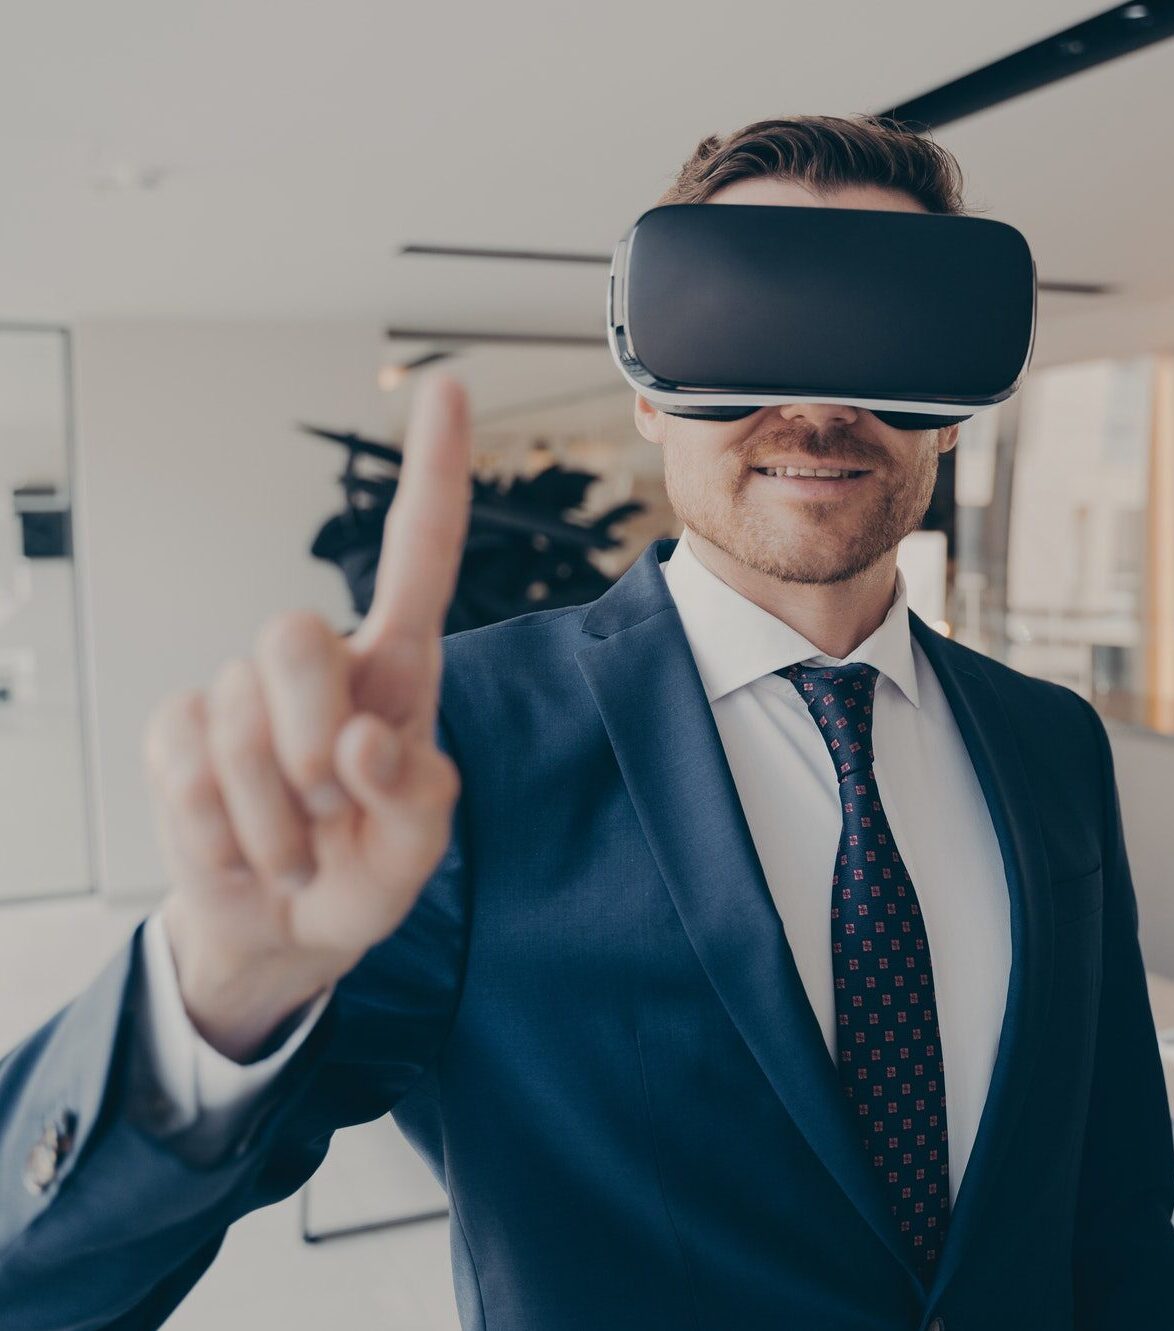 CEO man stands in office with VR headset and interacts with application virtual interface